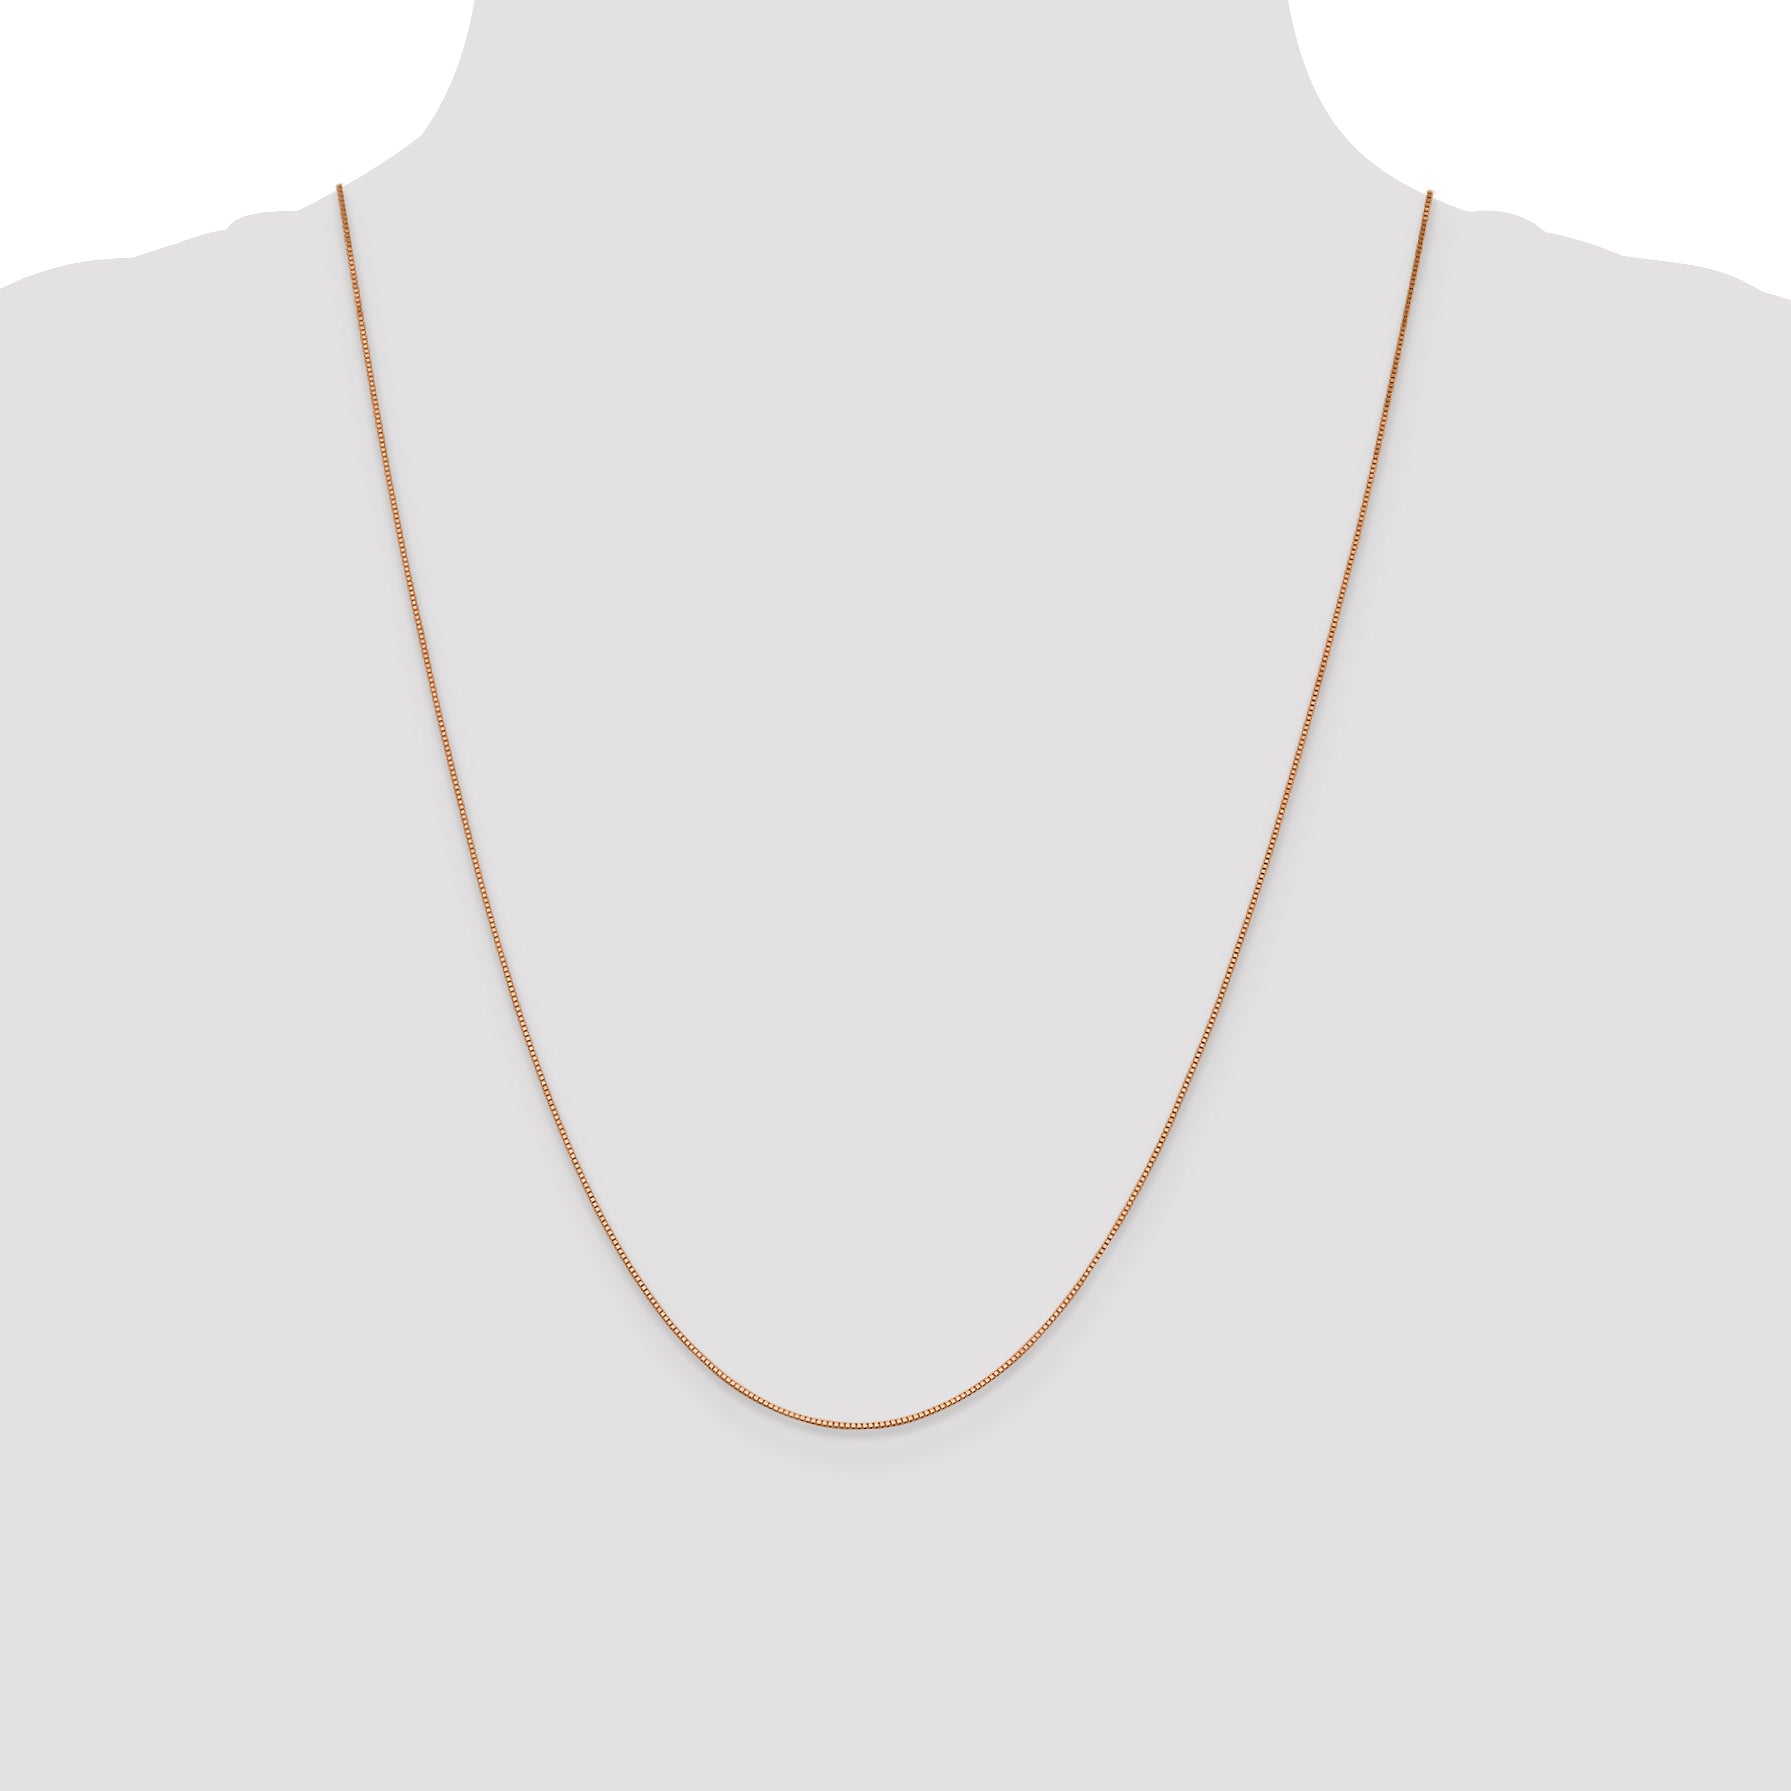 14K Rose Gold 16 inch .7mm Box Link with Lobster Clasp Chain